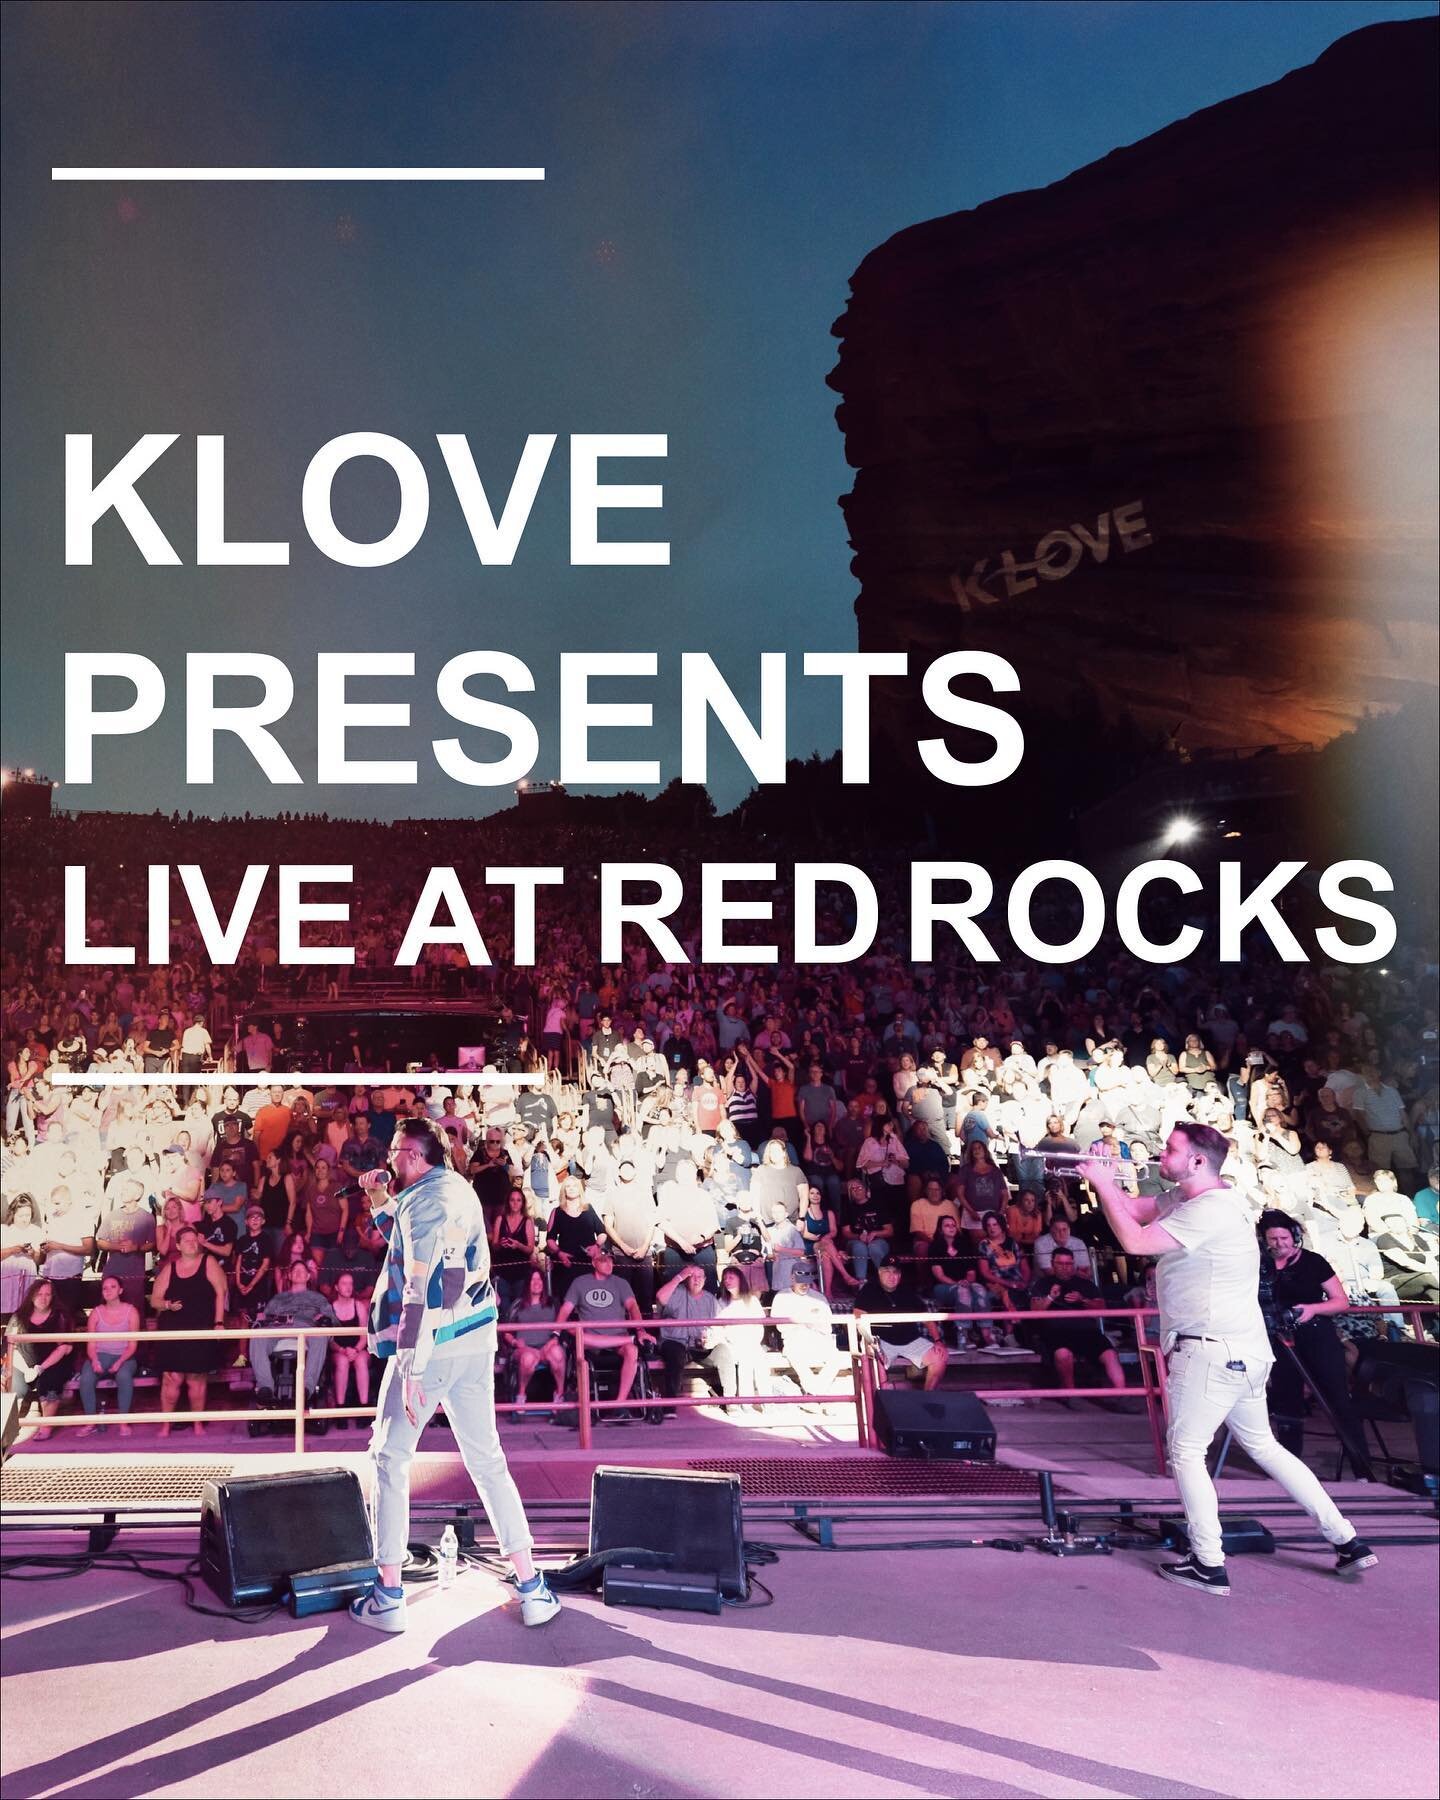 We were honored to help support the @kloveradio team at their KLOVE Presents Live At Red Rocks Festival, swipe for some bts, and footage from the festival.
&mdash;
PROJECT :: @taurenwells @dannygokey @kloveradio - K-LOVE Presents Live At Red Rocks 20